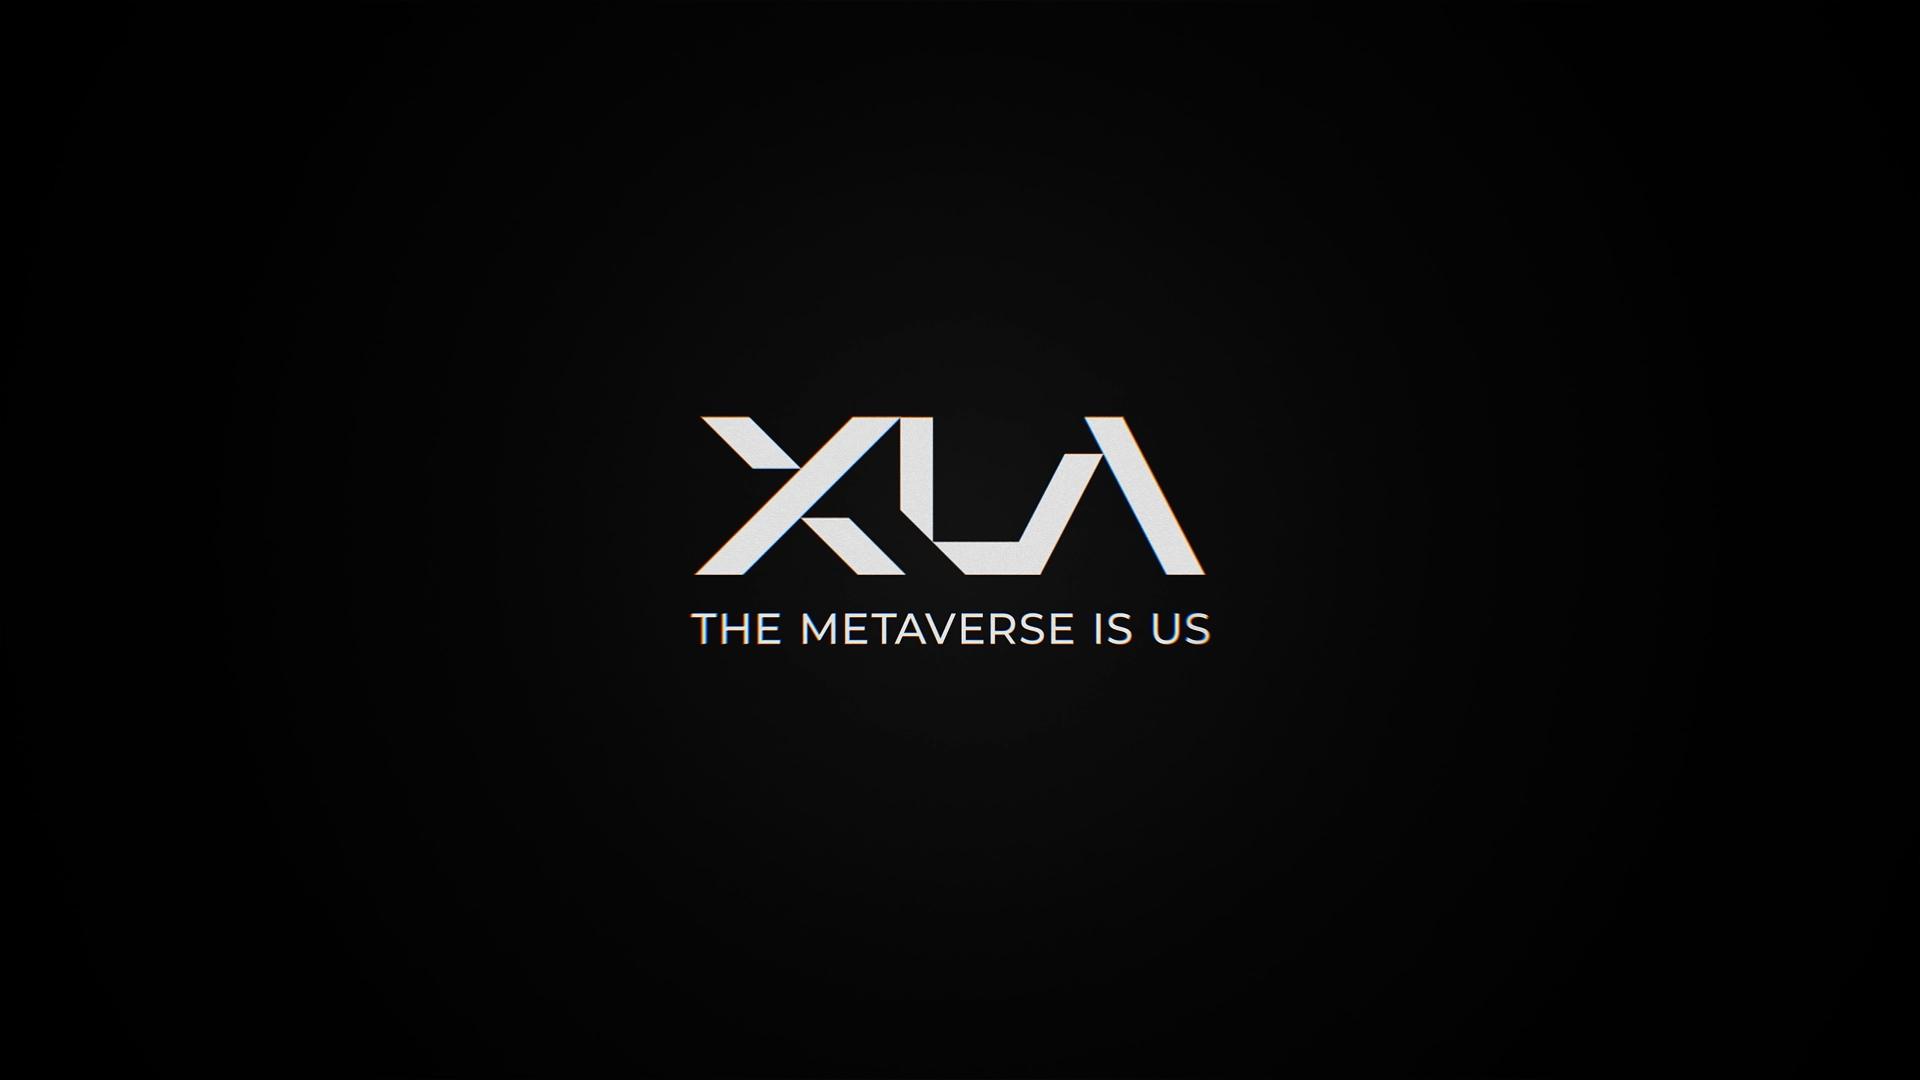 The-xla-metaverse-revealed-in-detail